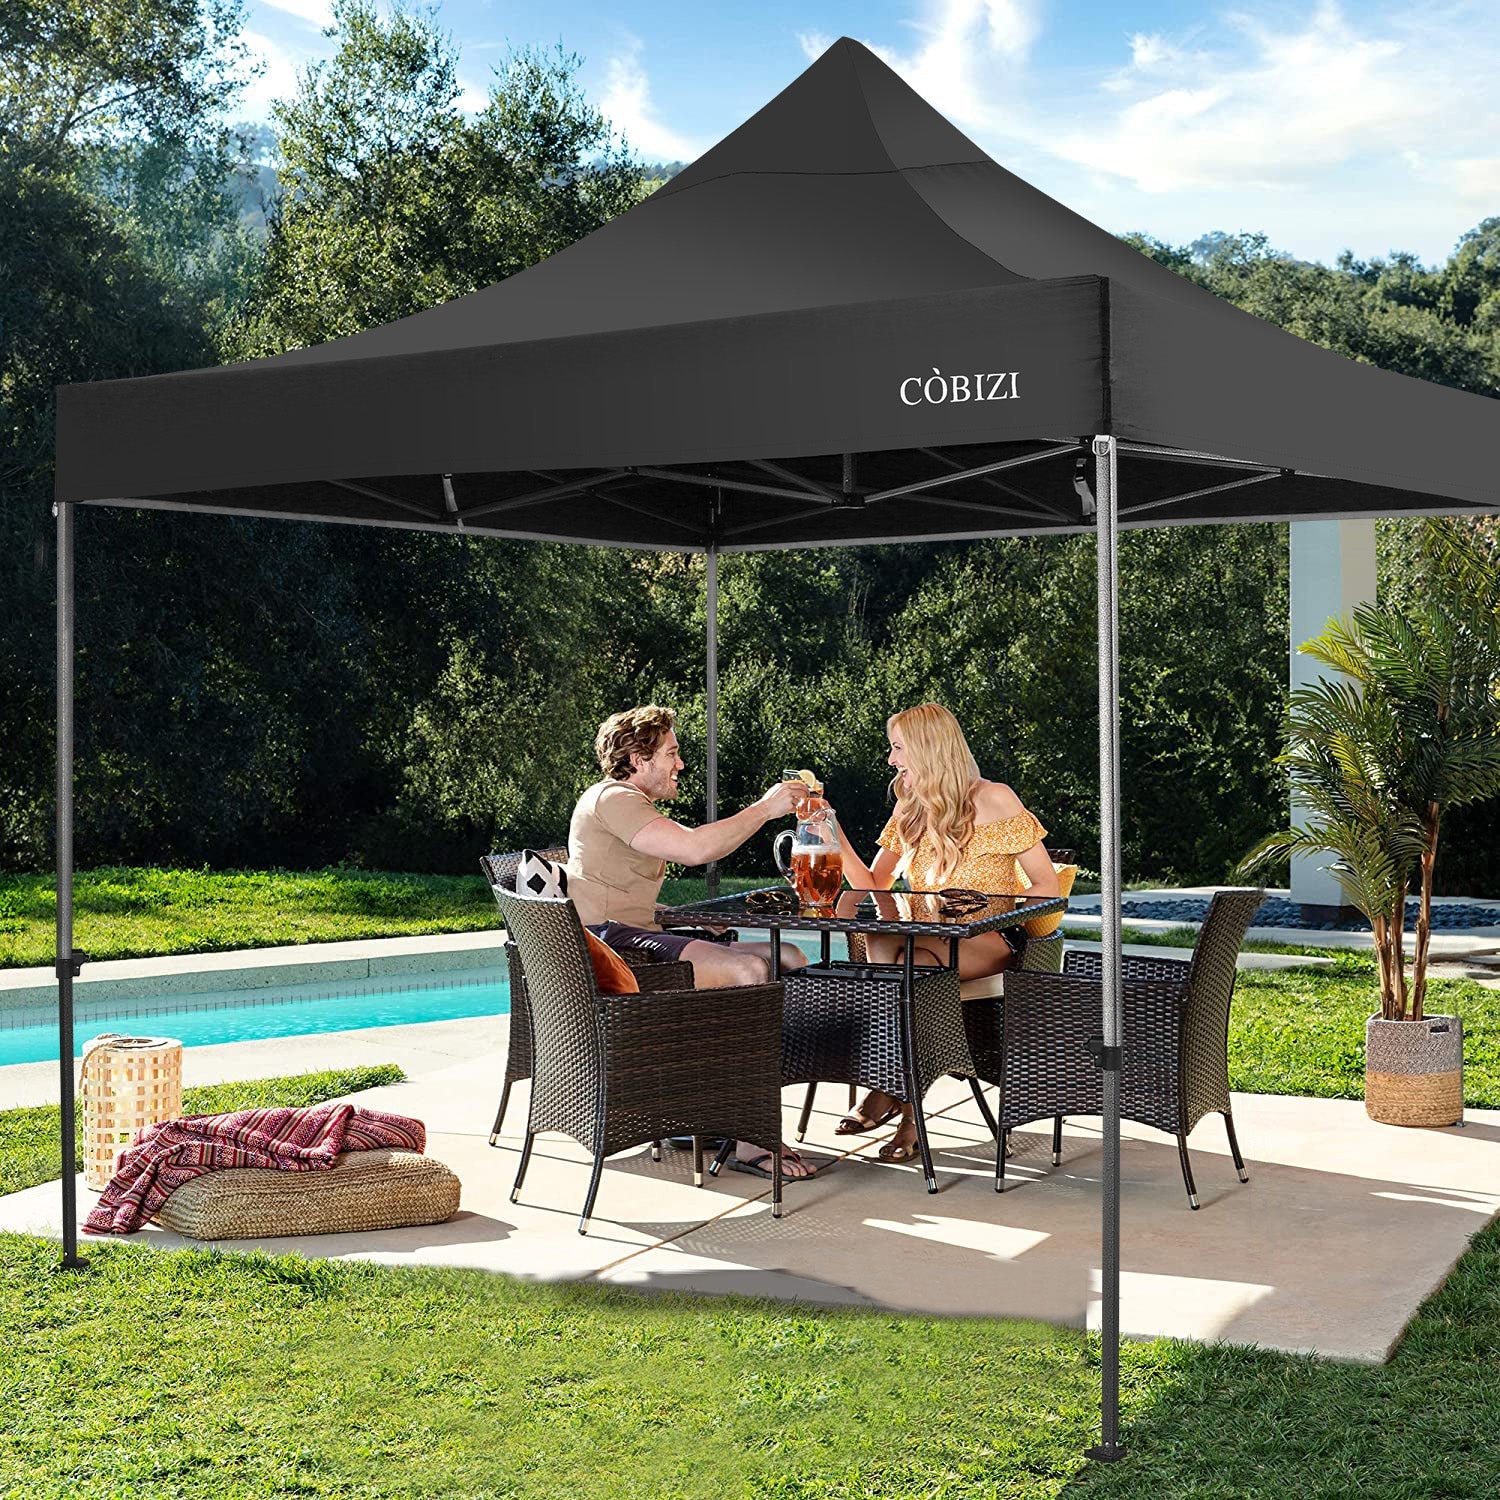 10 x 10ft Pop Up Canopy Tent Instant Outdoor Party Heavy Duty Canopy Straight Leg Commercial Gazebo Tent Shelter with 4 Removable Sidewalls, 4 Sand Bags, Roller Bag, Black